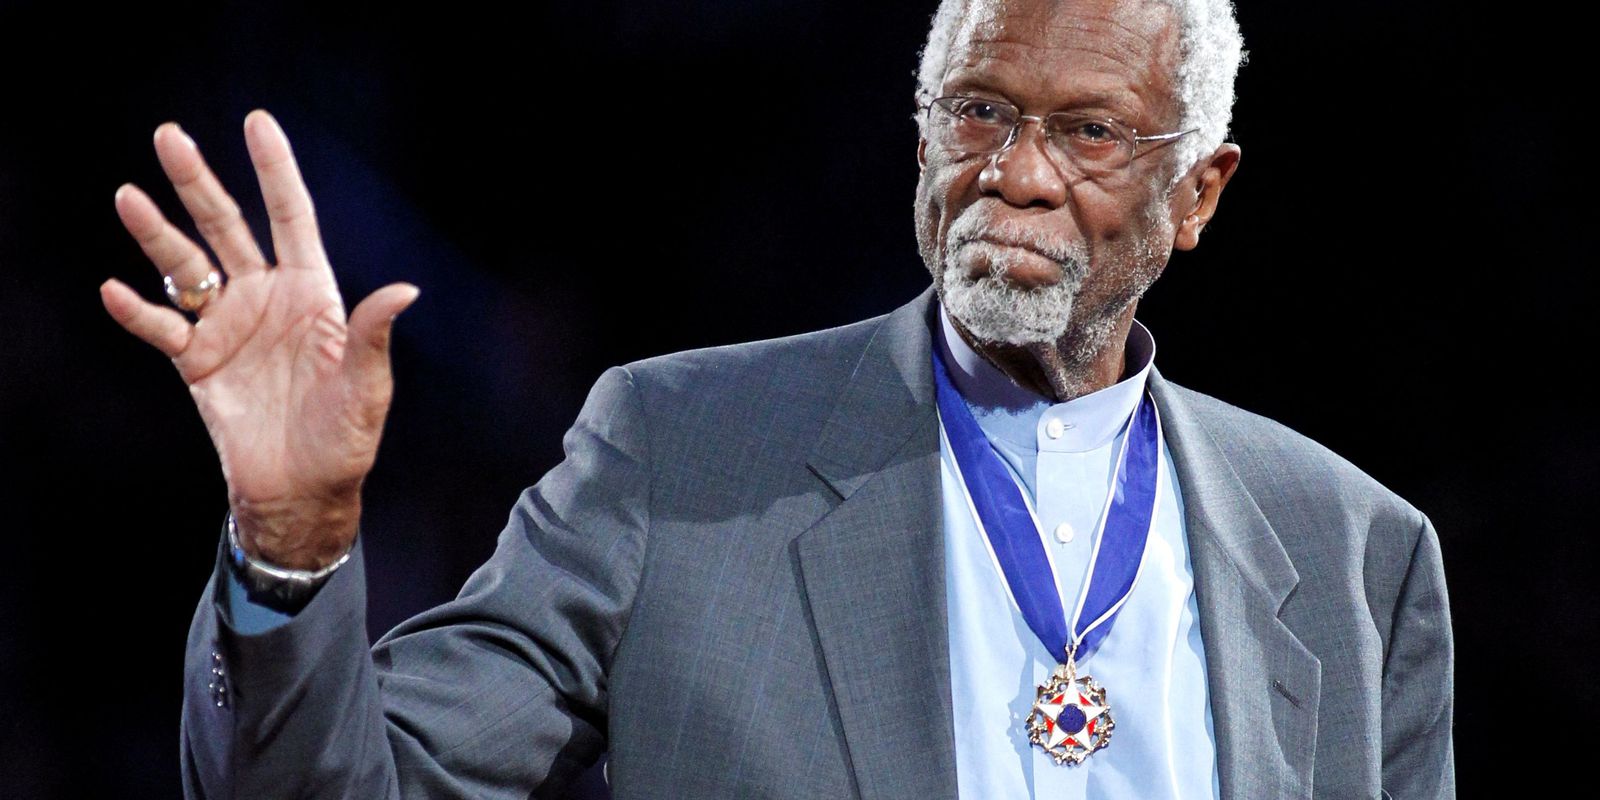 NBA to retire number 6 jersey to honor Bill Russell